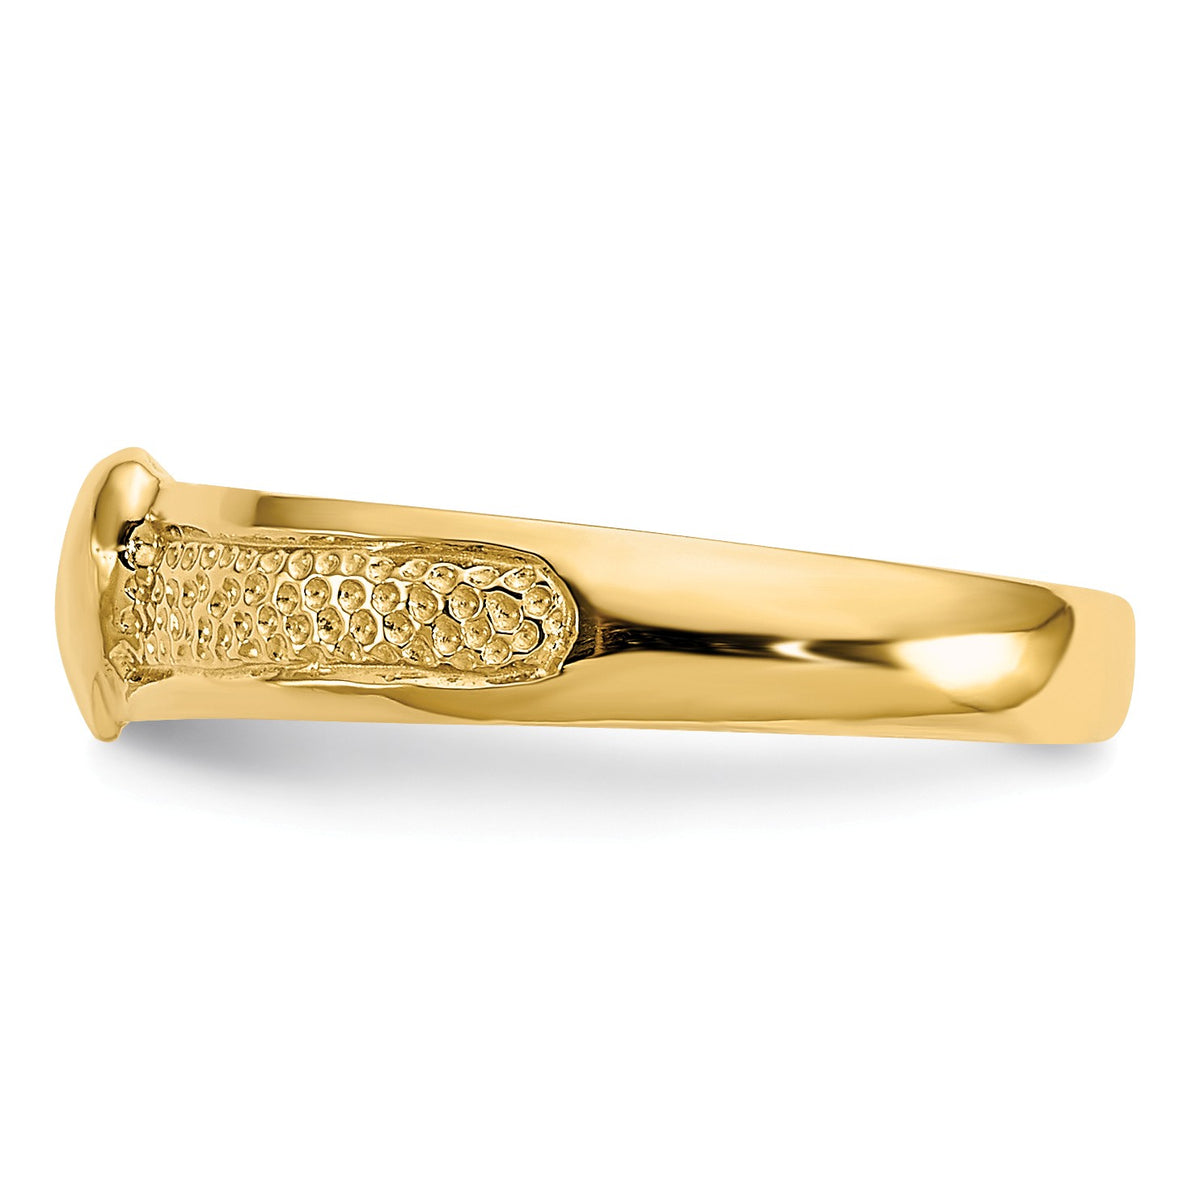 Alternate view of the Heart Toe Ring in 14 Karat Gold by The Black Bow Jewelry Co.